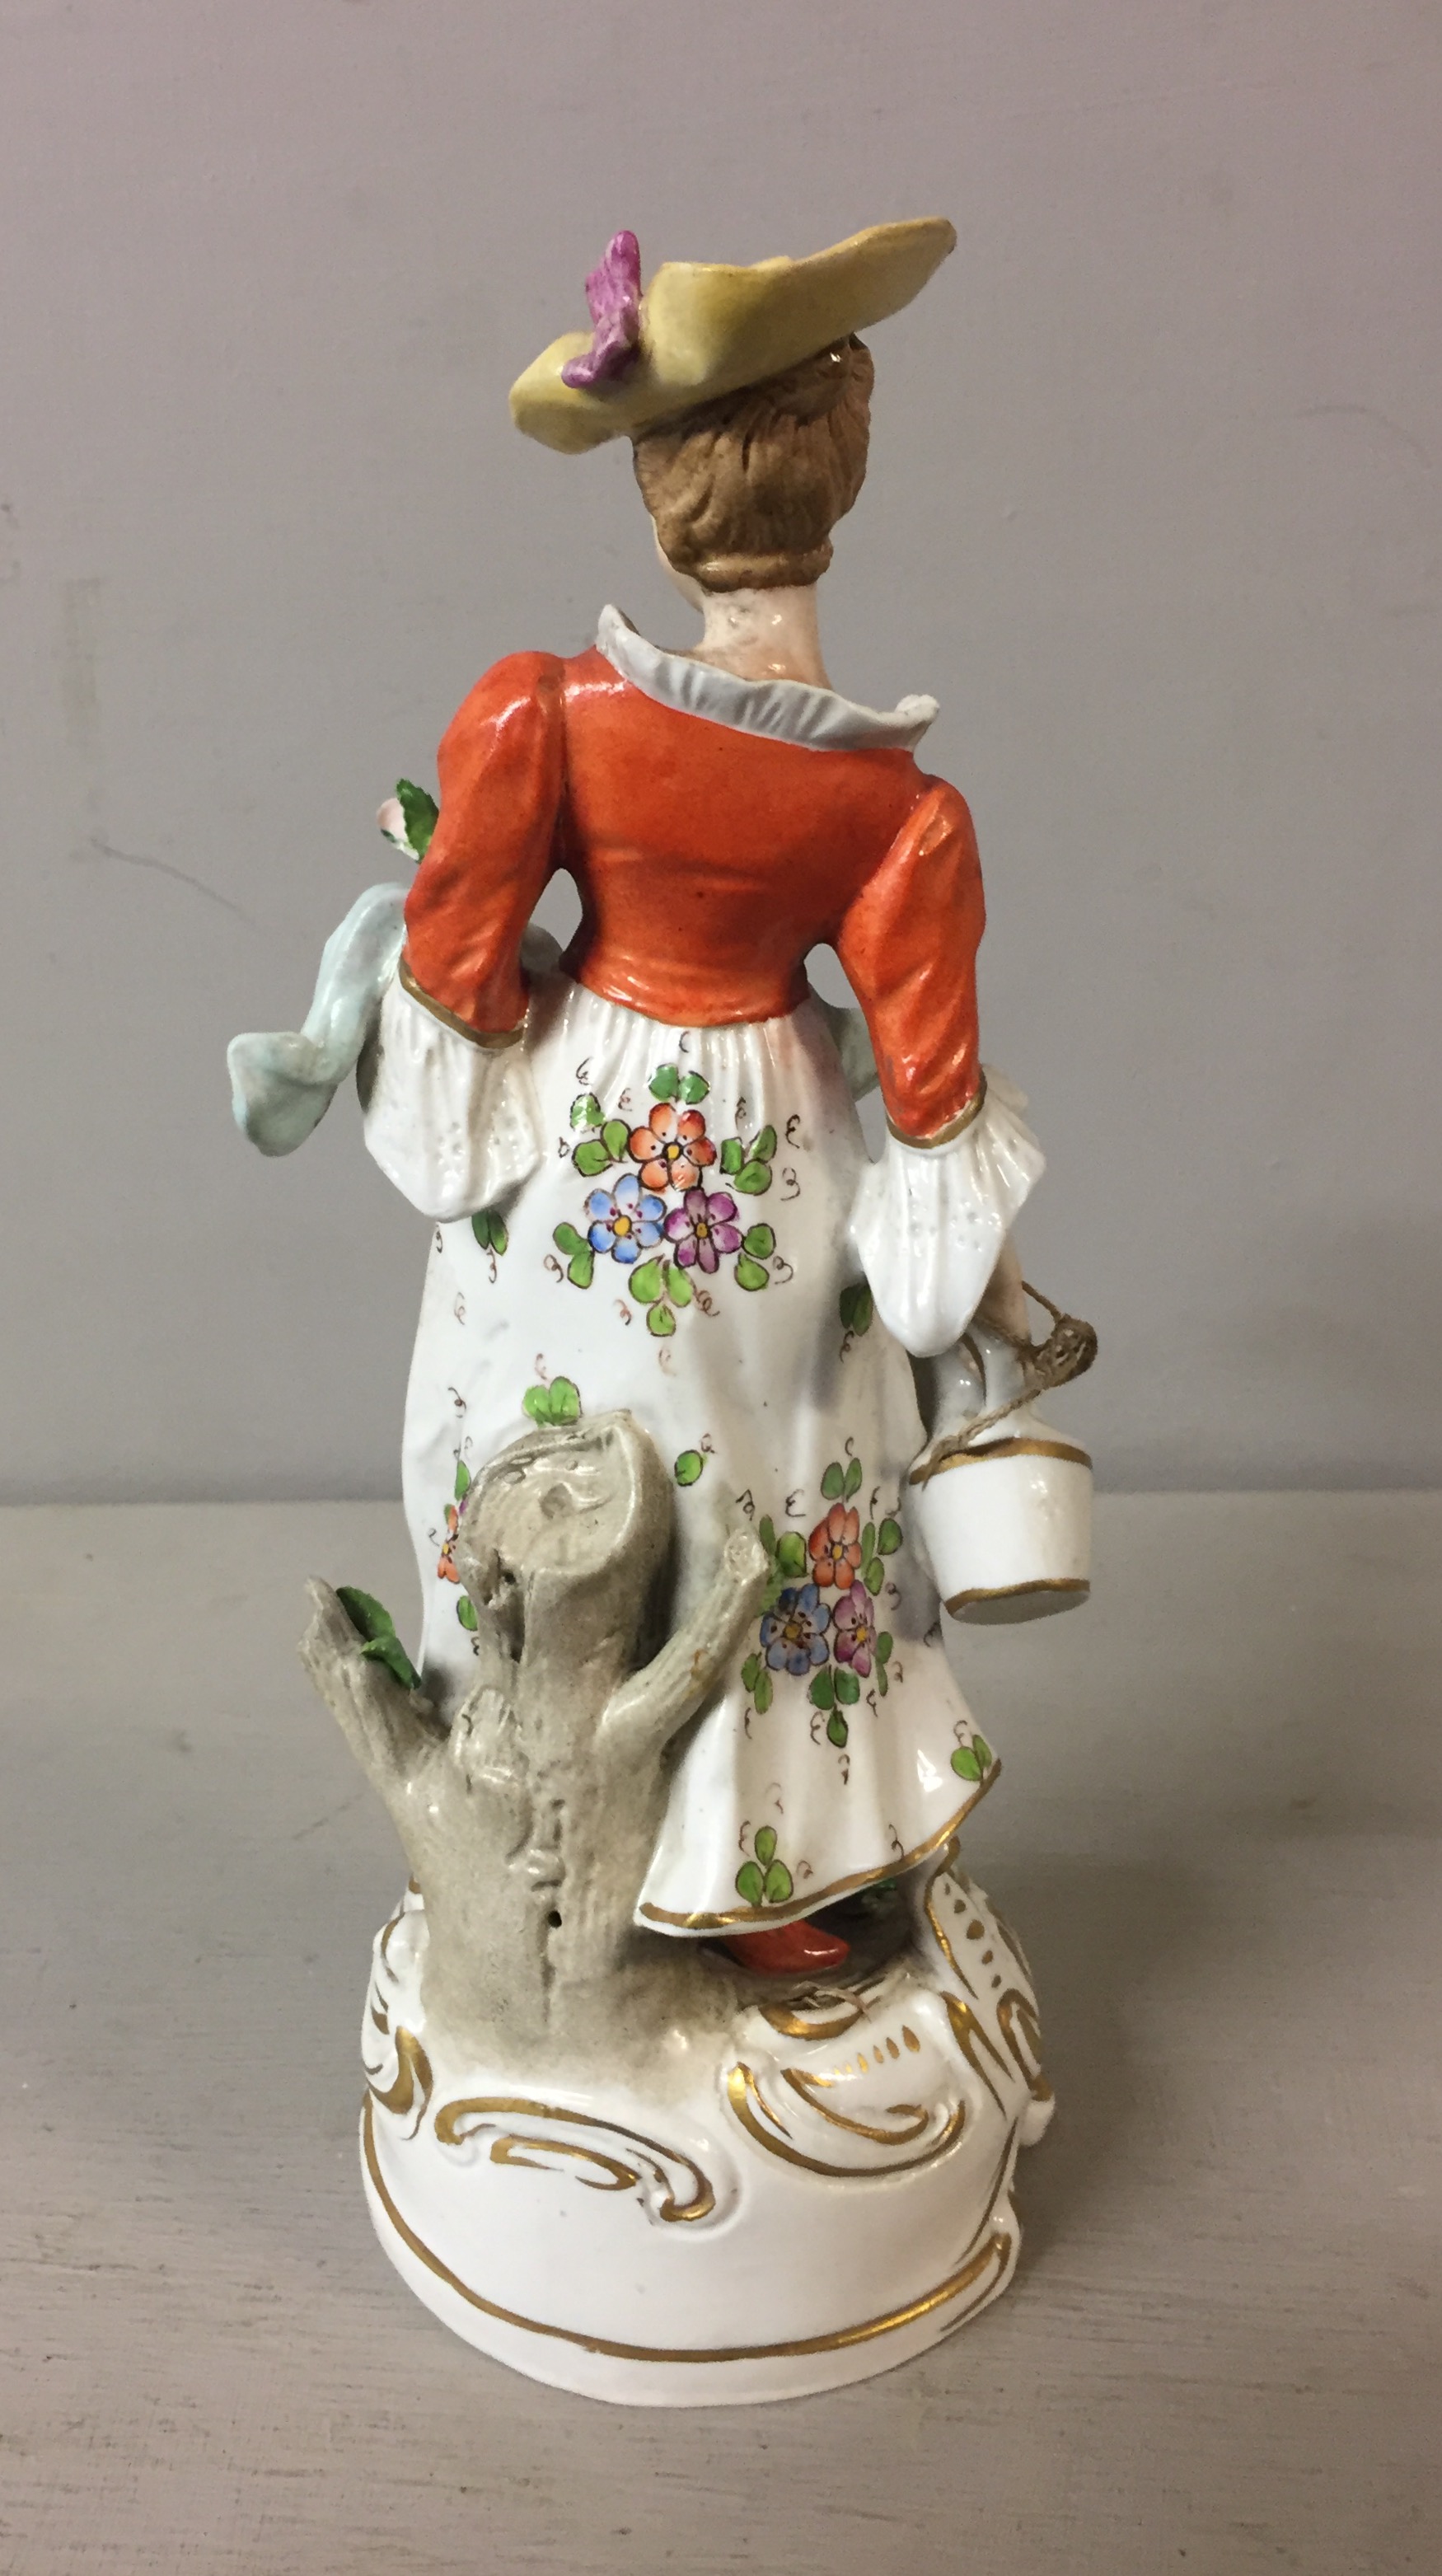 SITZENDORF, A 20TH CENTURY PORCELAIN FIGURE OF A LADY GARDENER Holding a watering can. (h 23cm) - Image 2 of 3